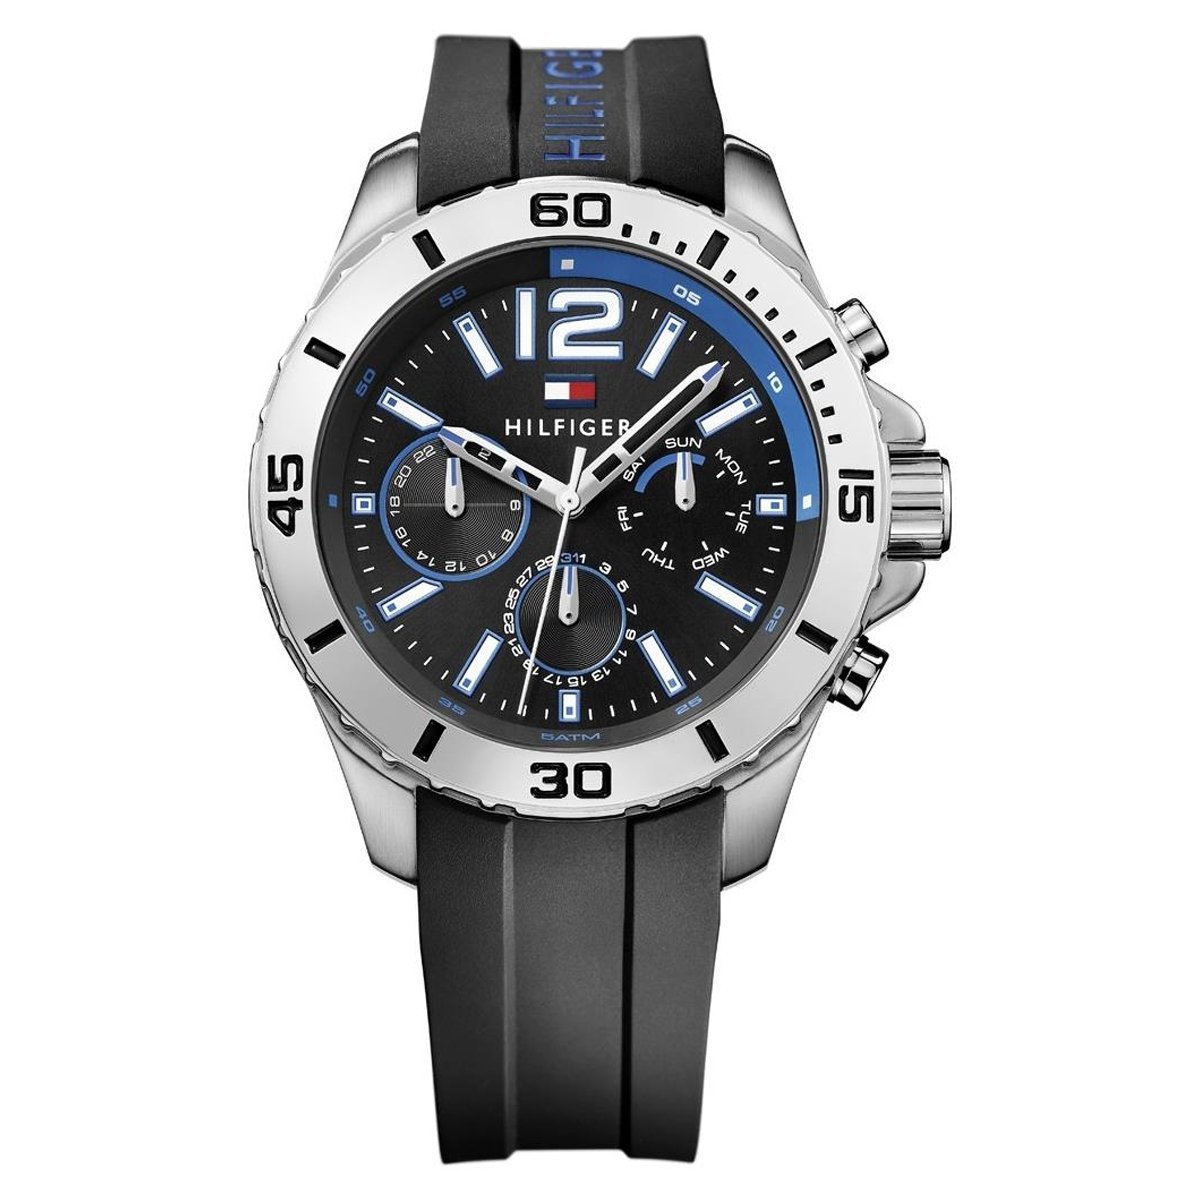 Tommy Hilfiger Men's Watch Chronograph Cool Sport Black 1791143 - Watches & Crystals